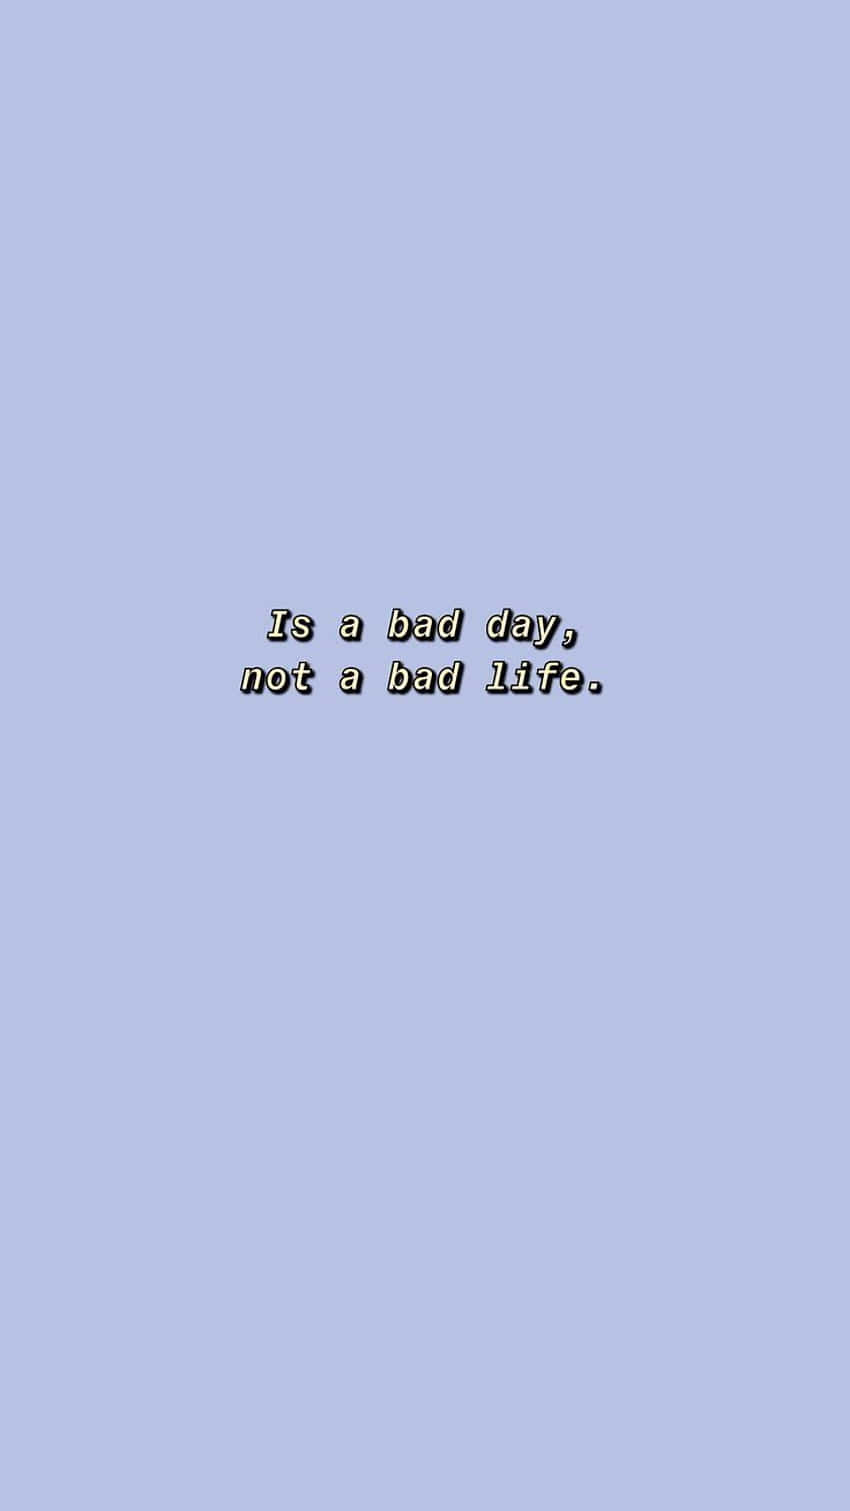 Download A Blue Background With The Text, I'm A Good Day, Not A Good Life'  Wallpaper 